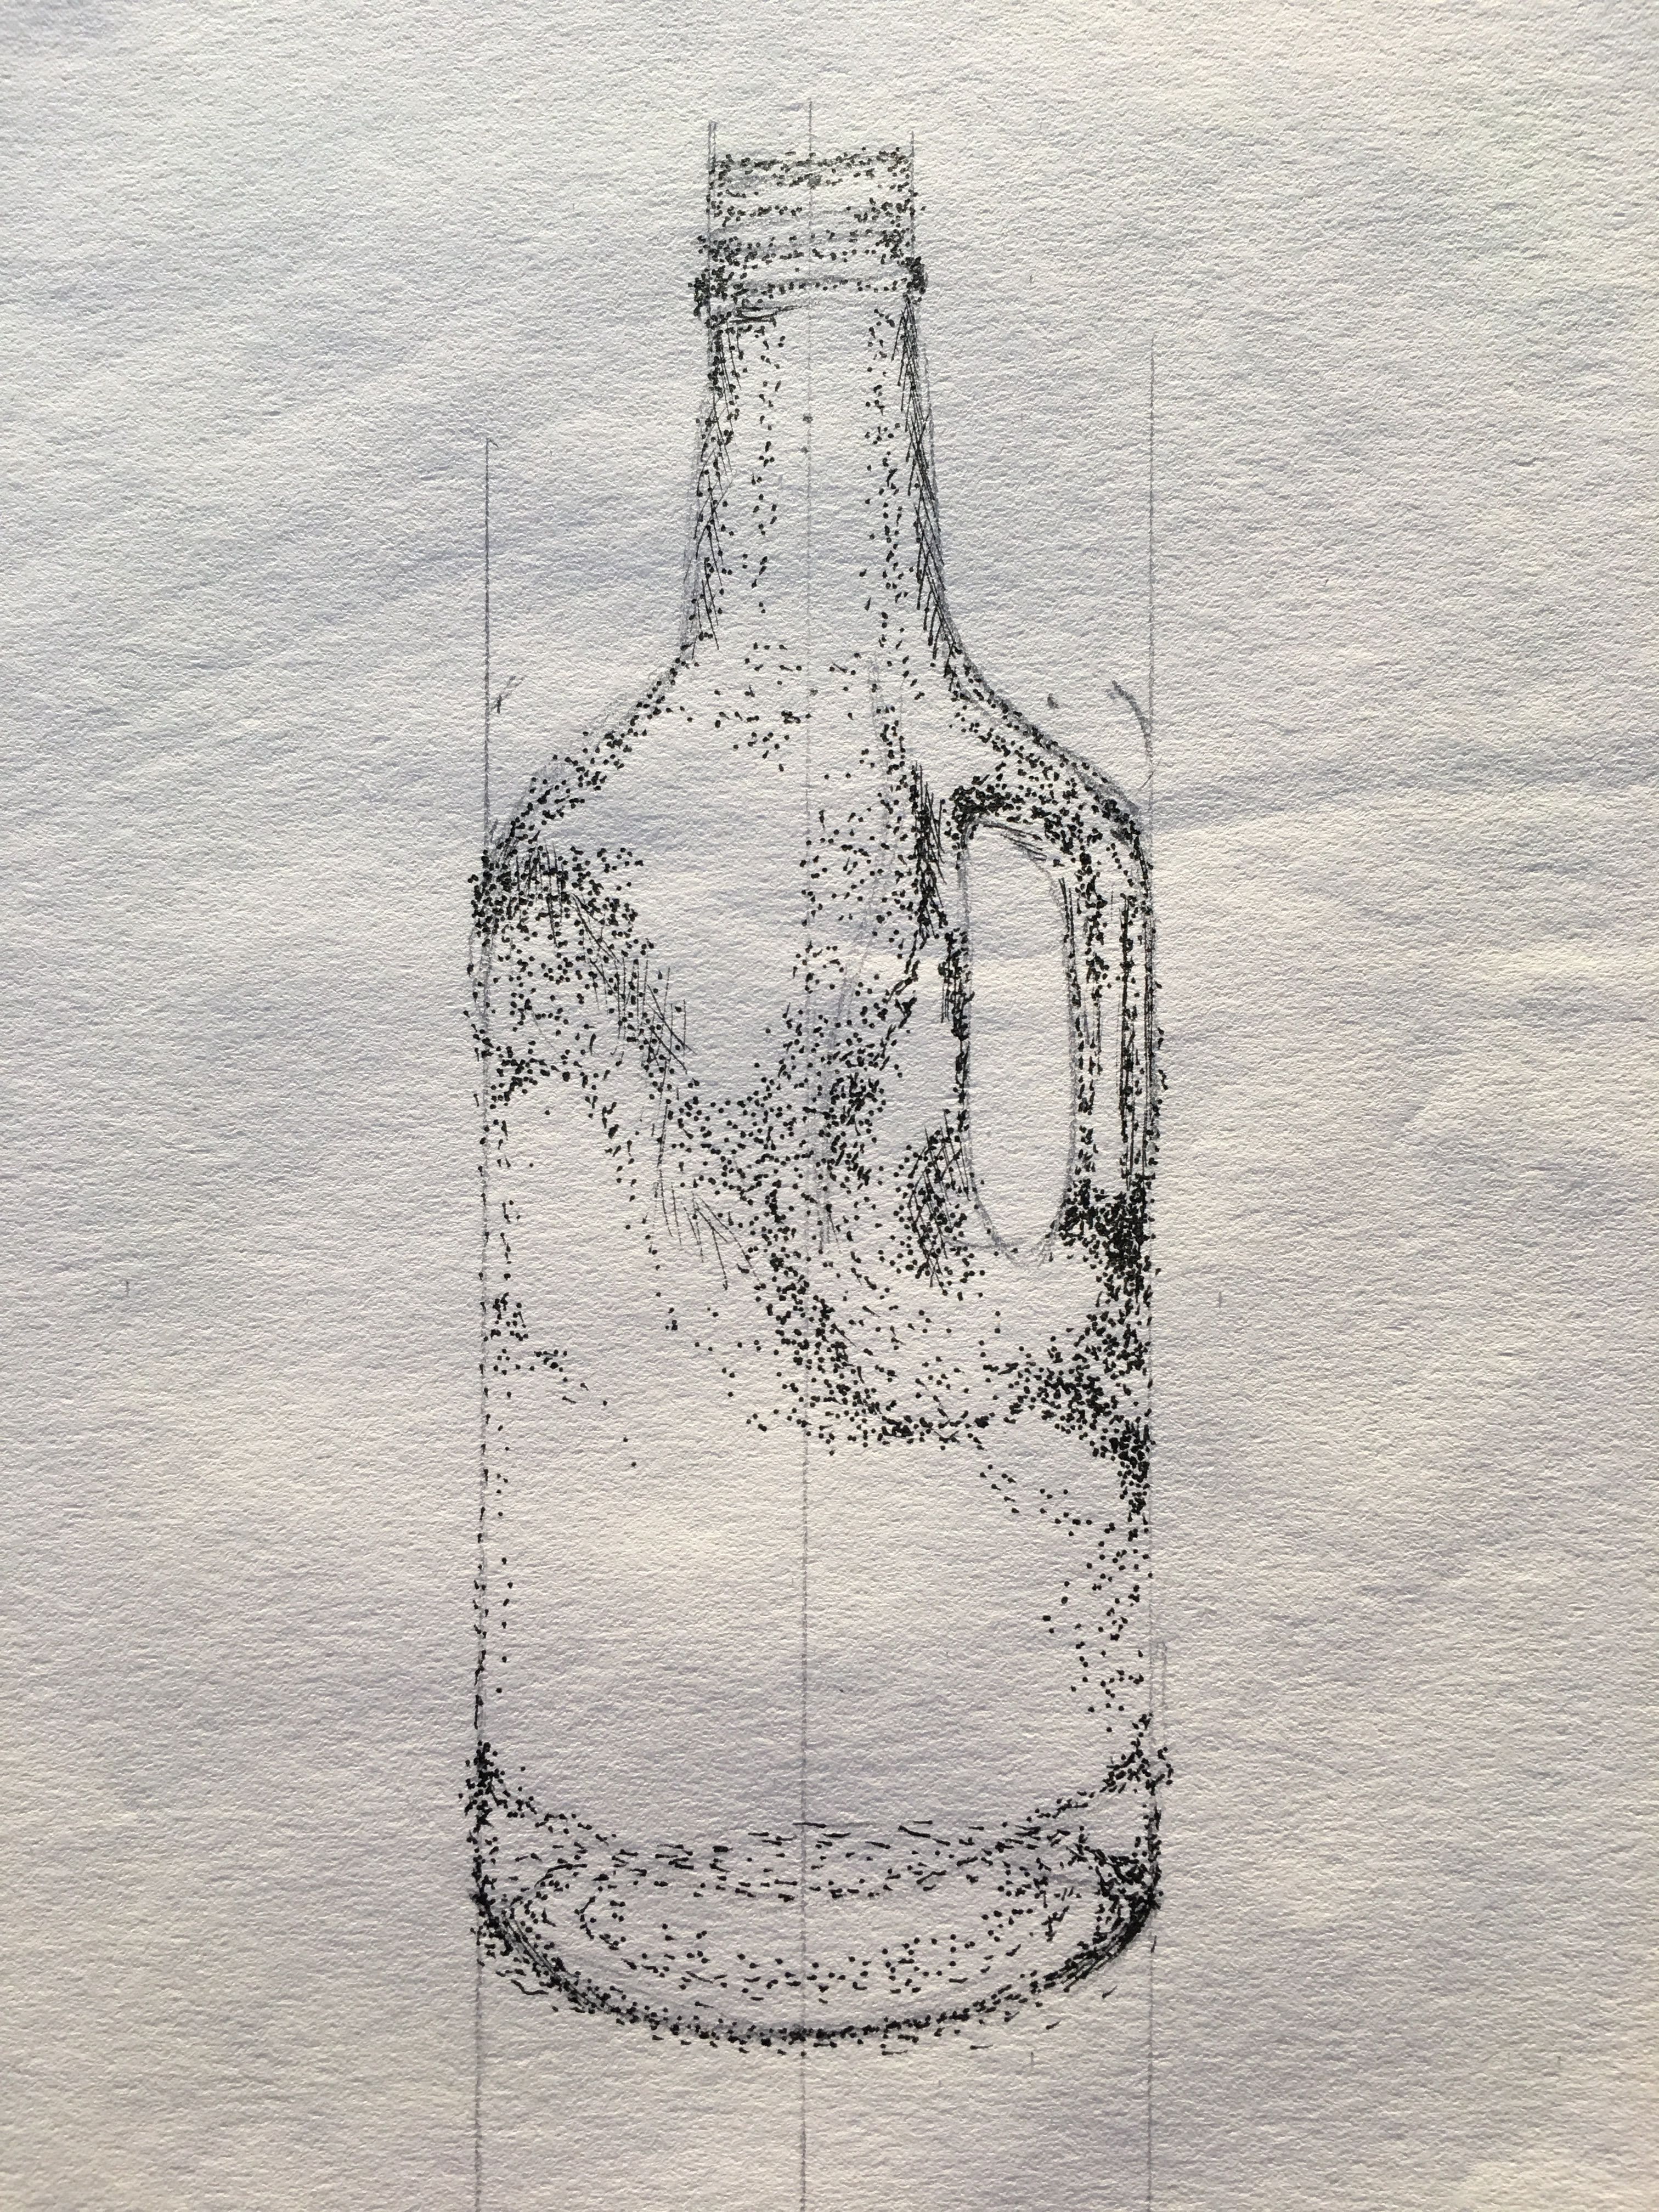 Dot Bottle, 2003
Pencil and Ink on Paper
8"W x 10"H, Walli White, artist